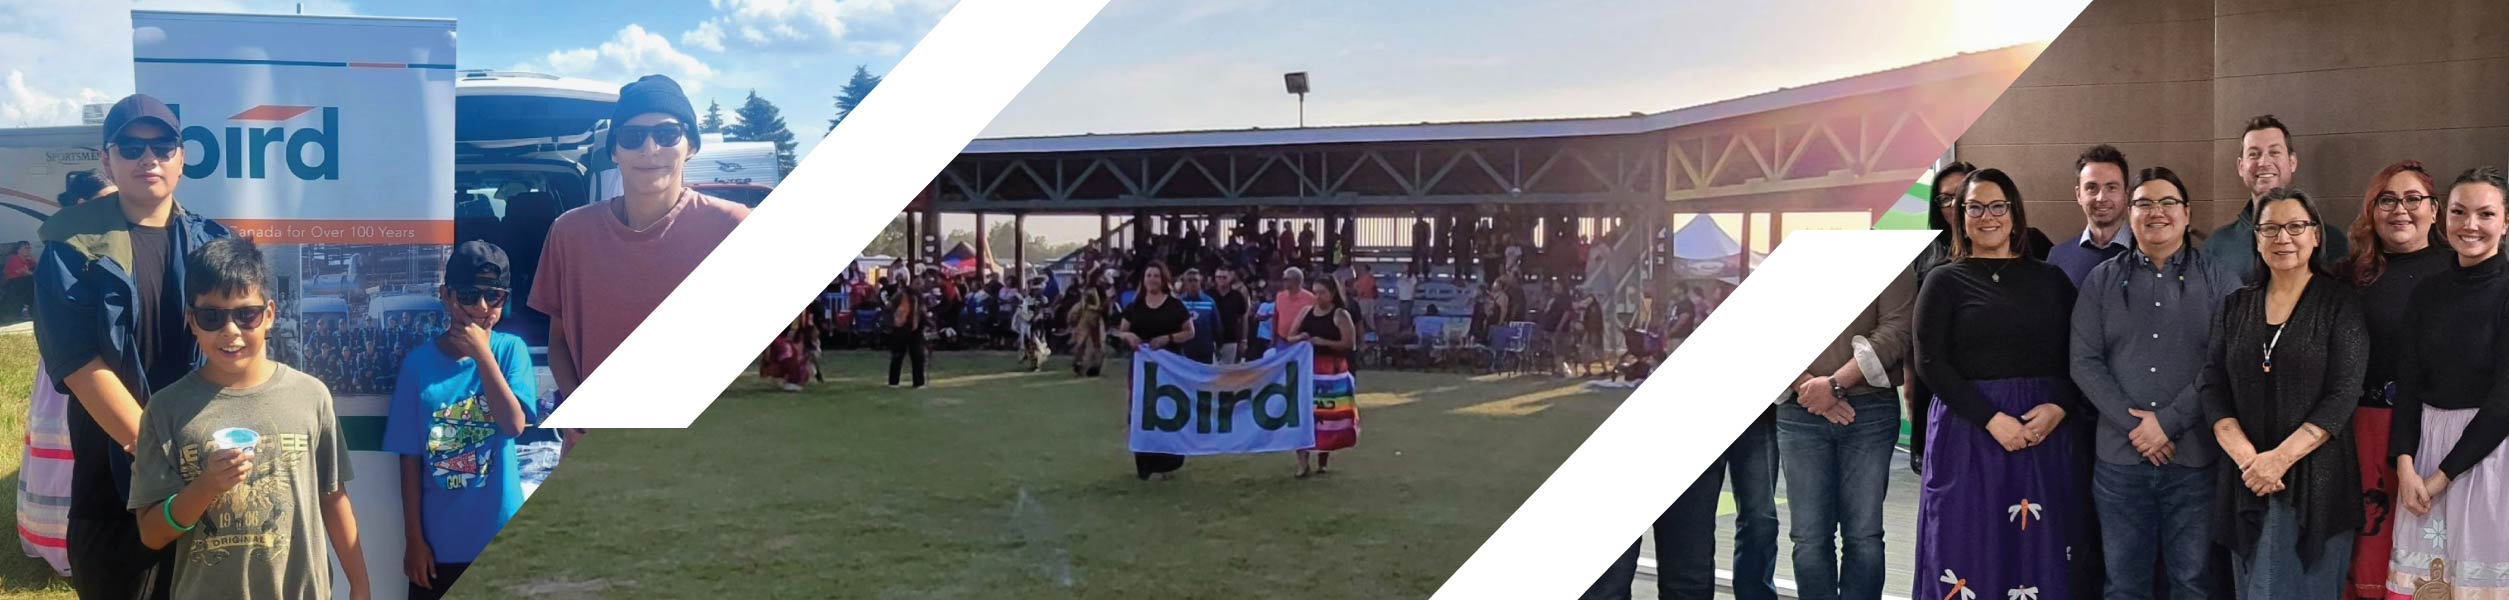 First Nations Community at various Bird Events